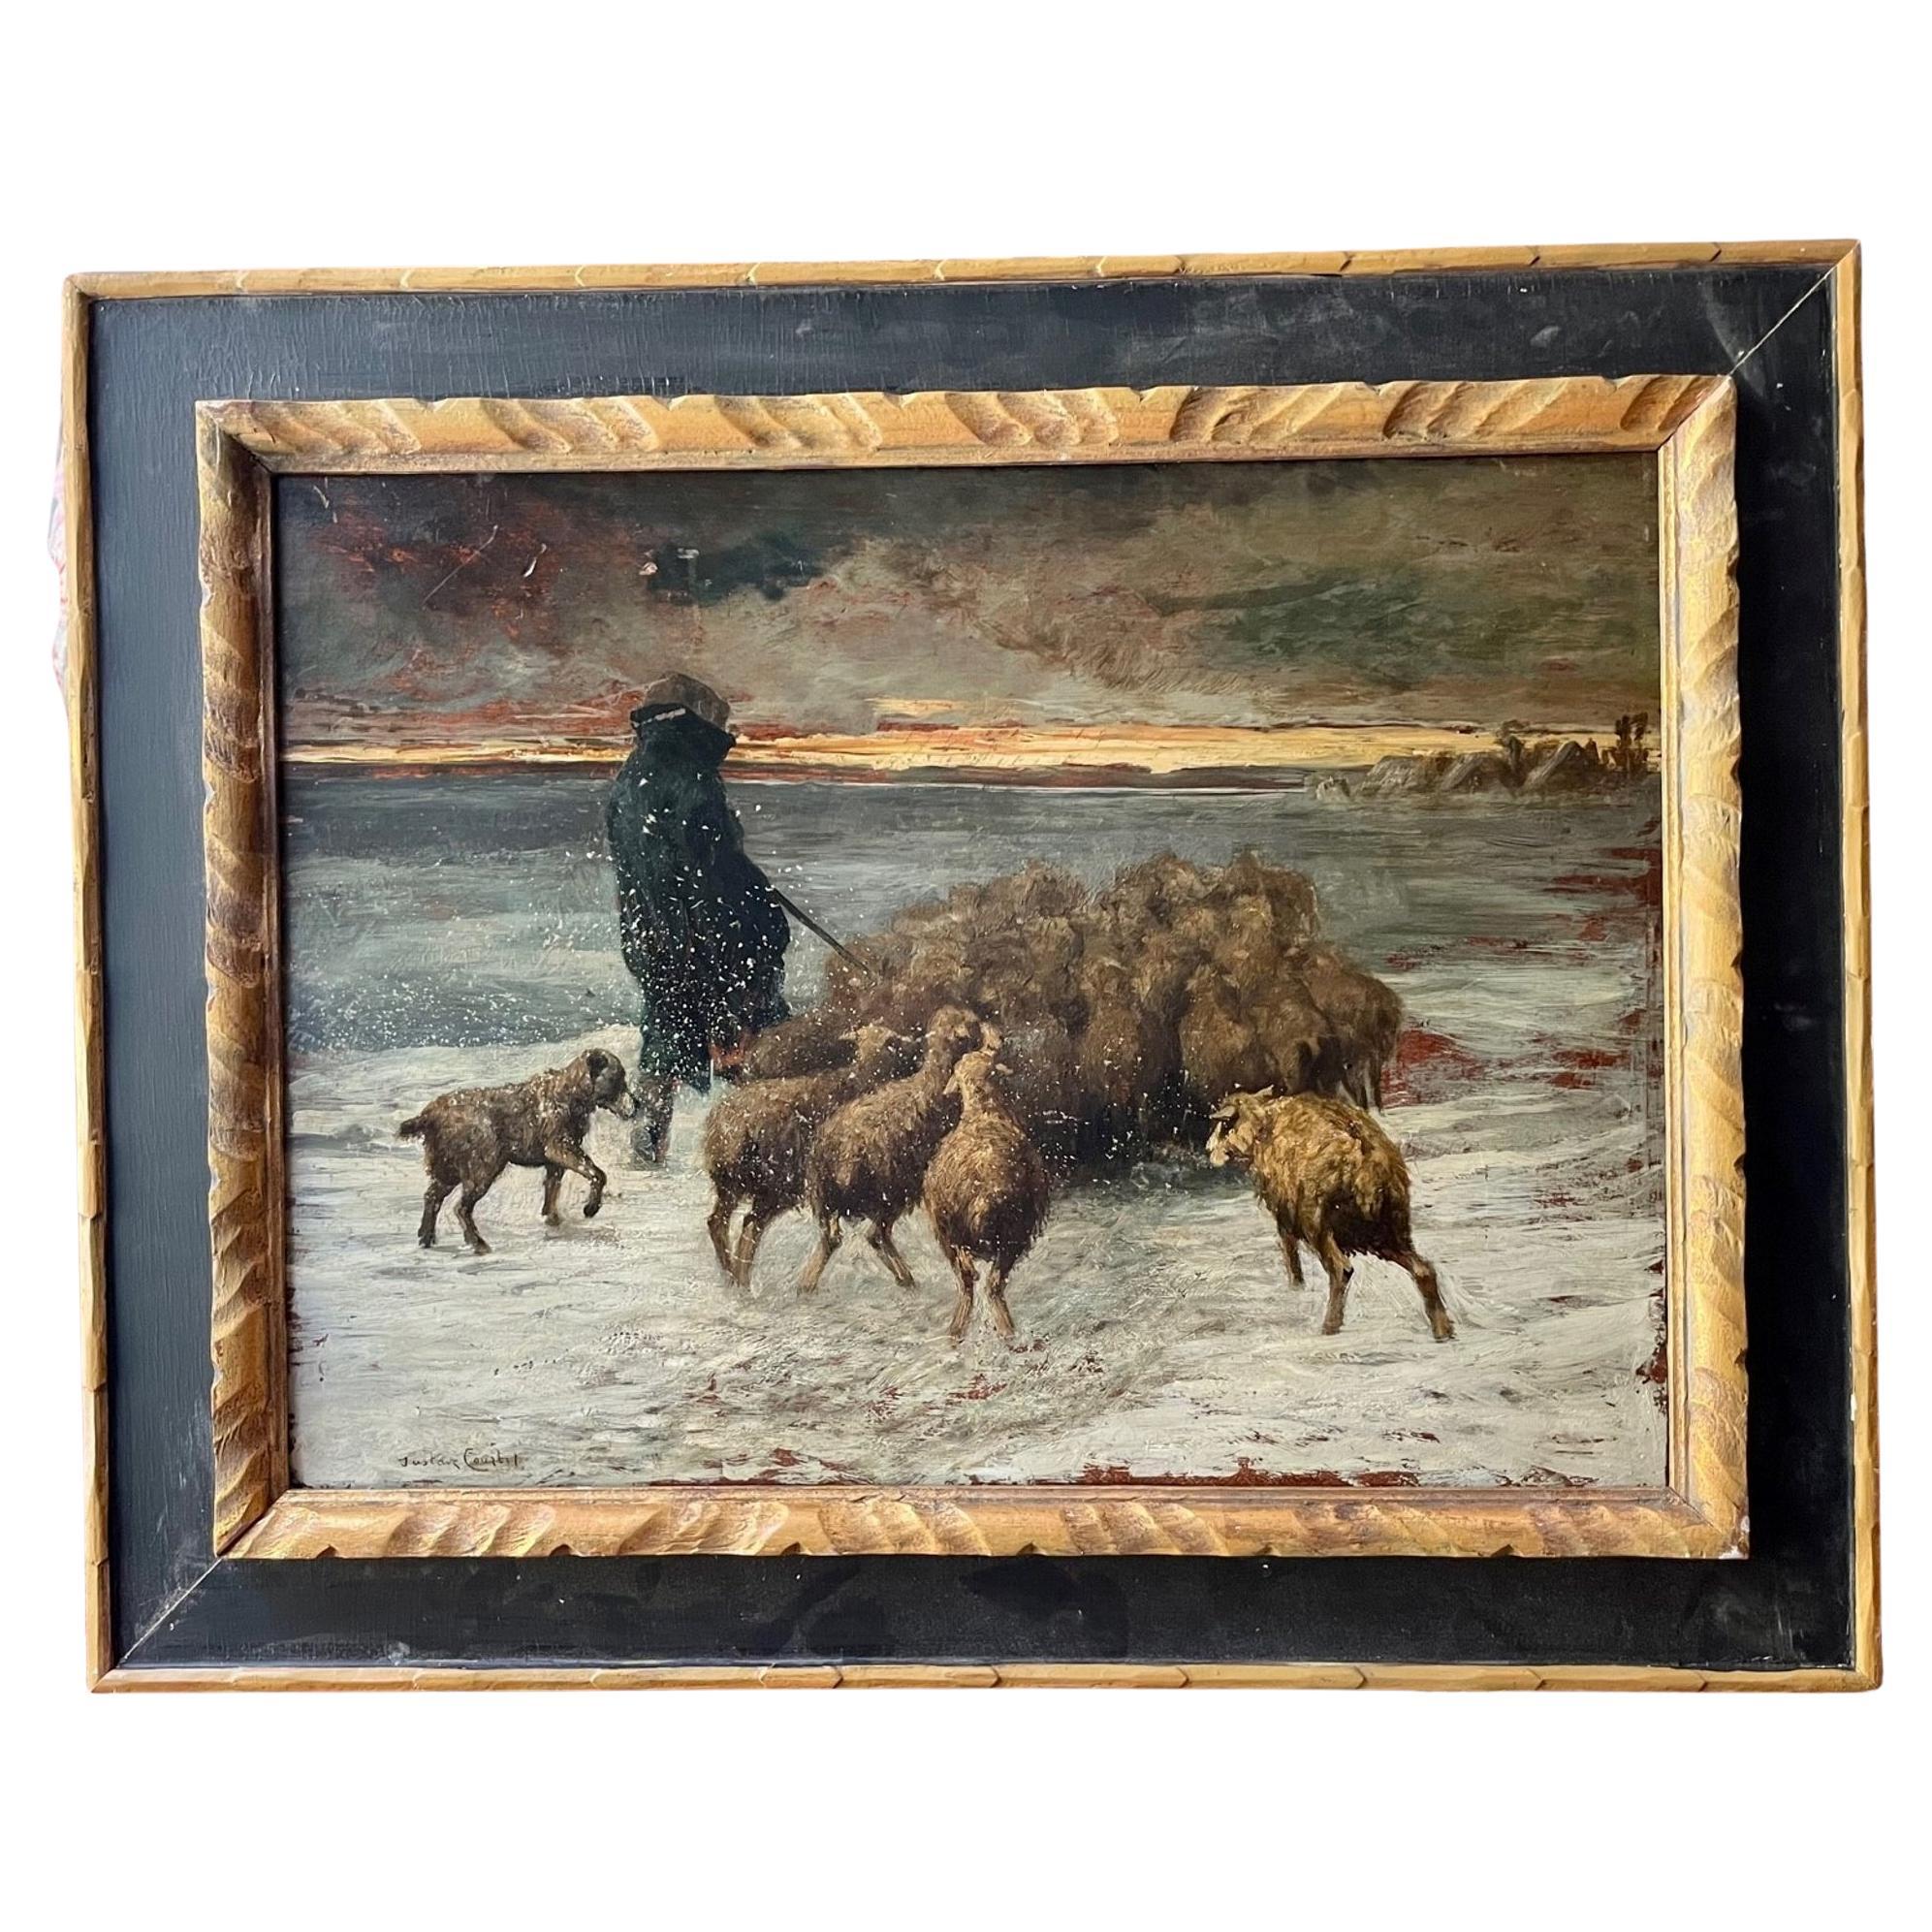 French 19th C. Barbizon Painting “Sheep in Blizzard” Signed Gustave Courbet For Sale